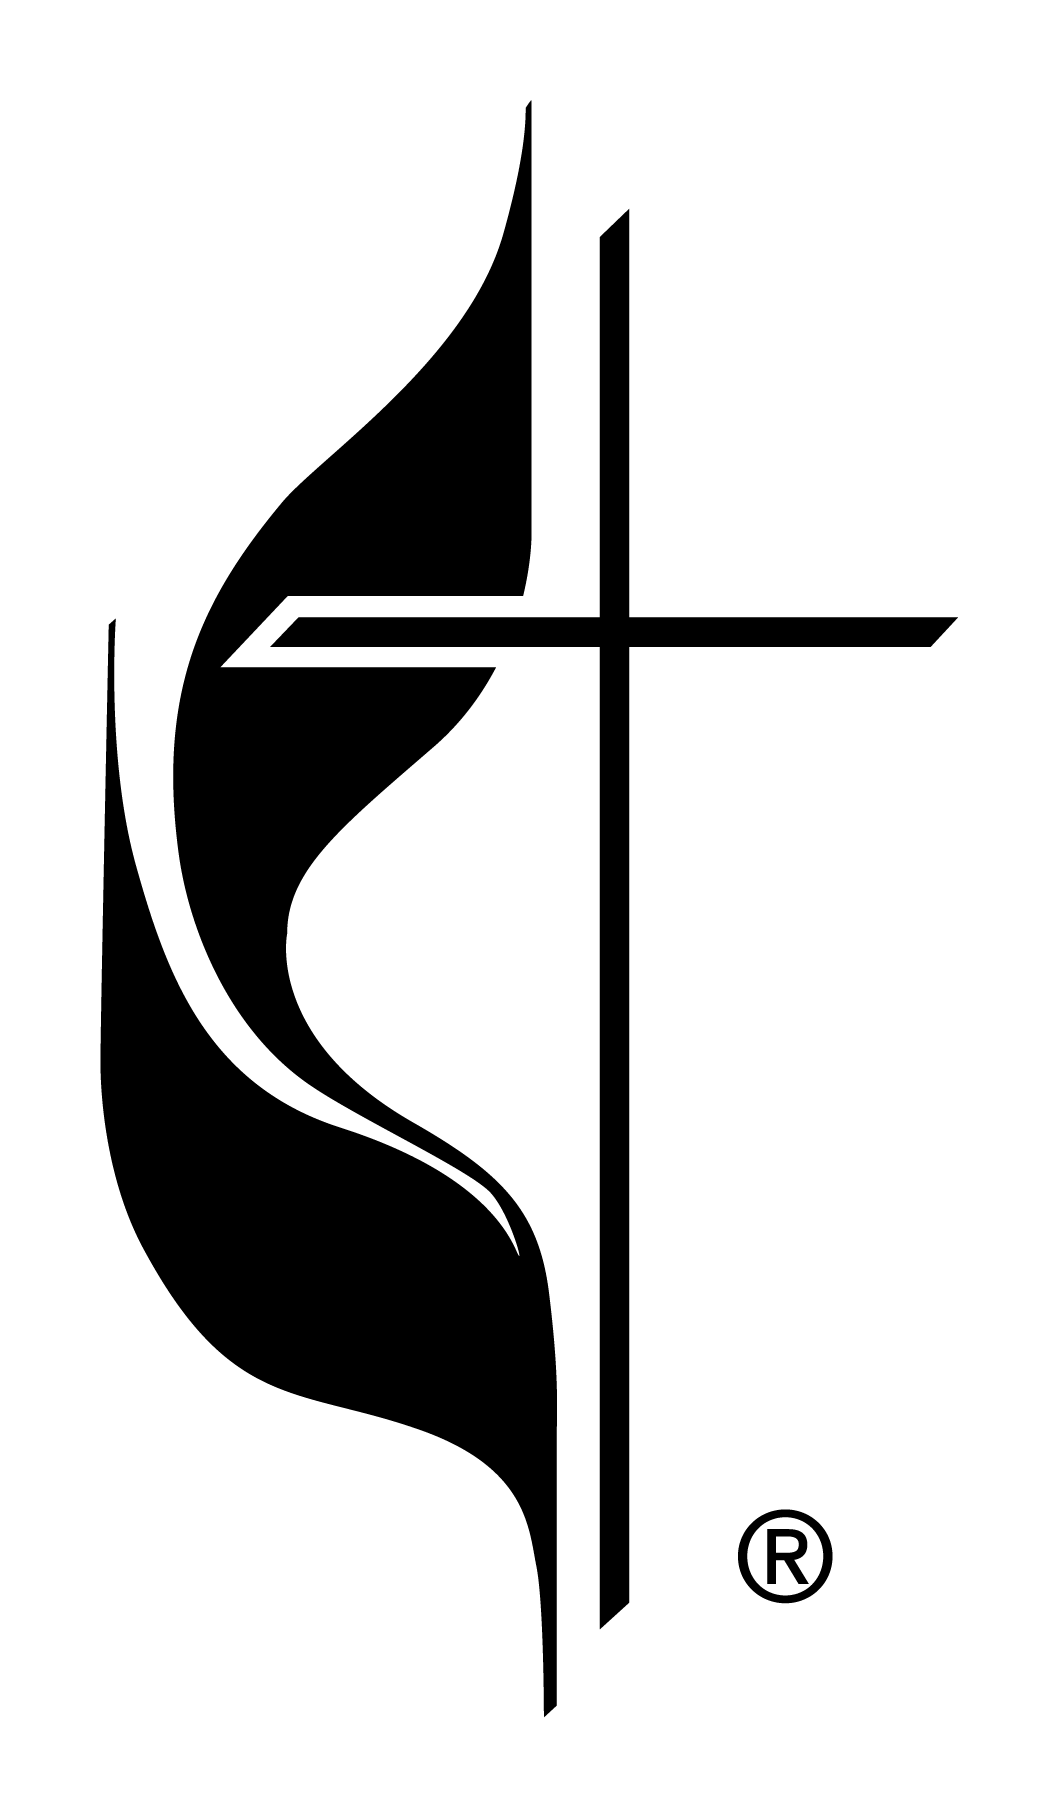 Who Has White Cross Logo - Cross and Flame – The United Methodist Church